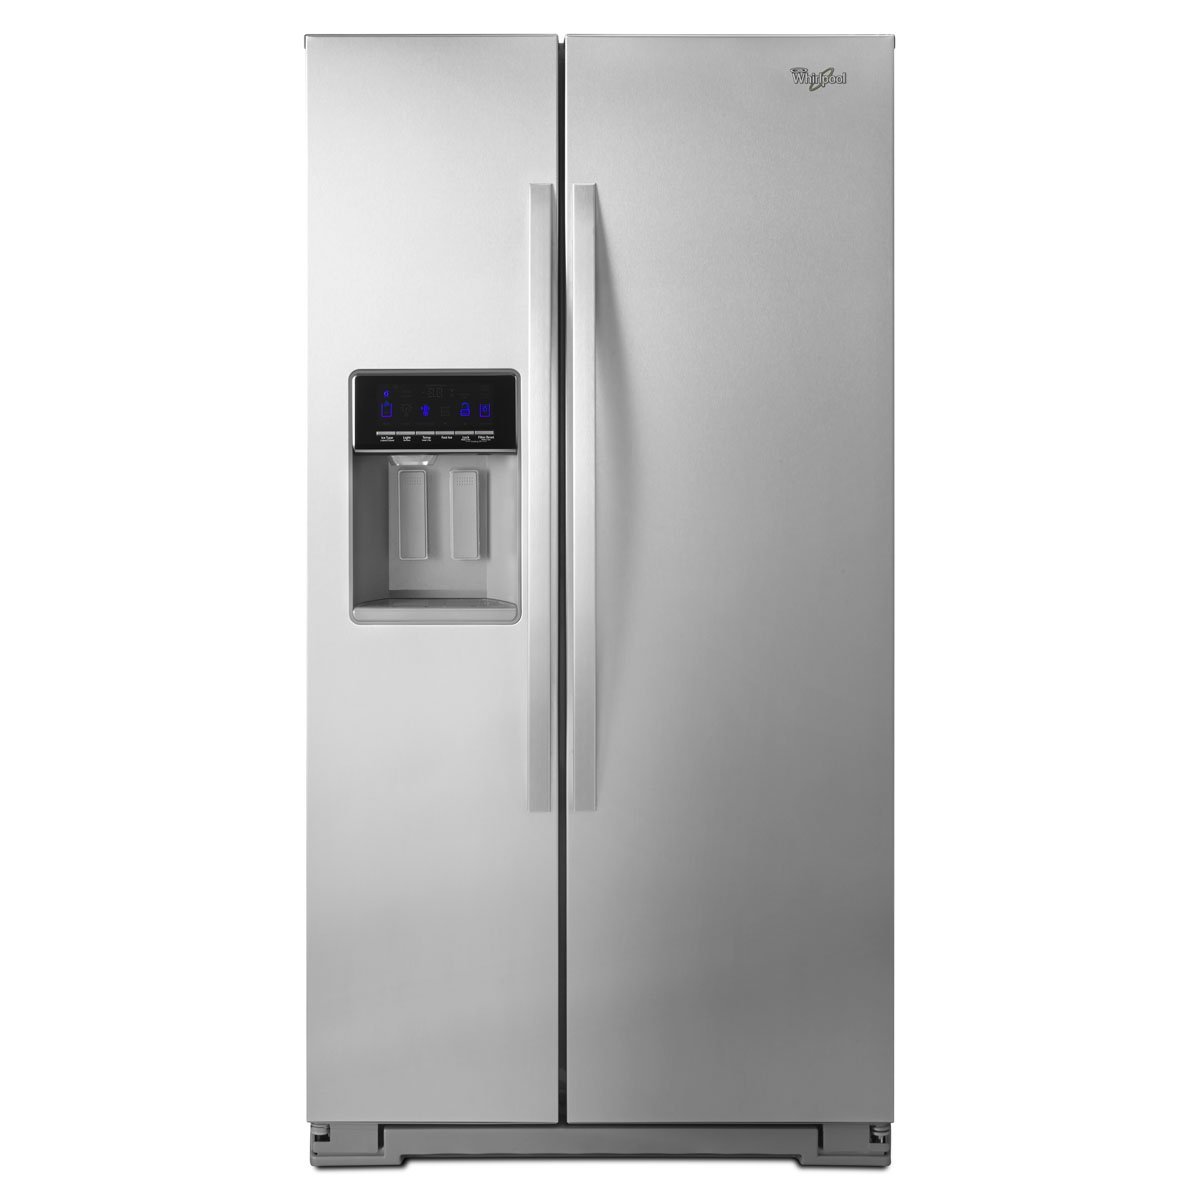 Refrigerador Whirlpool Side By Side 21 Pies Acero Inoxidable